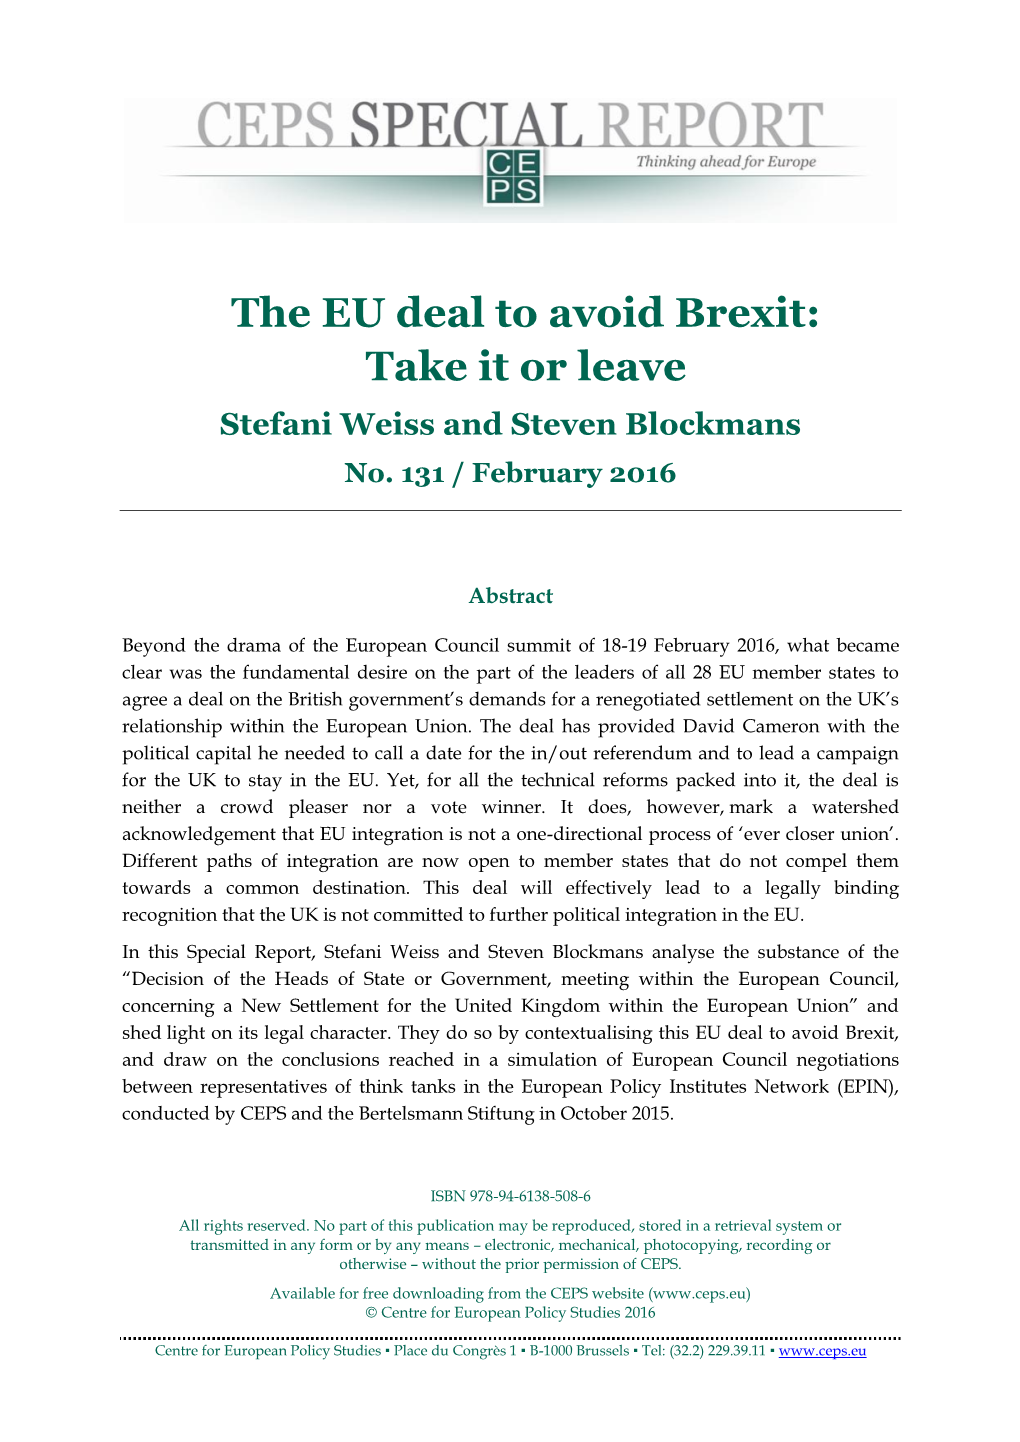 The EU Deal to Avoid Brexit: Take It Or Leave Stefani Weiss and Steven Blockmans No